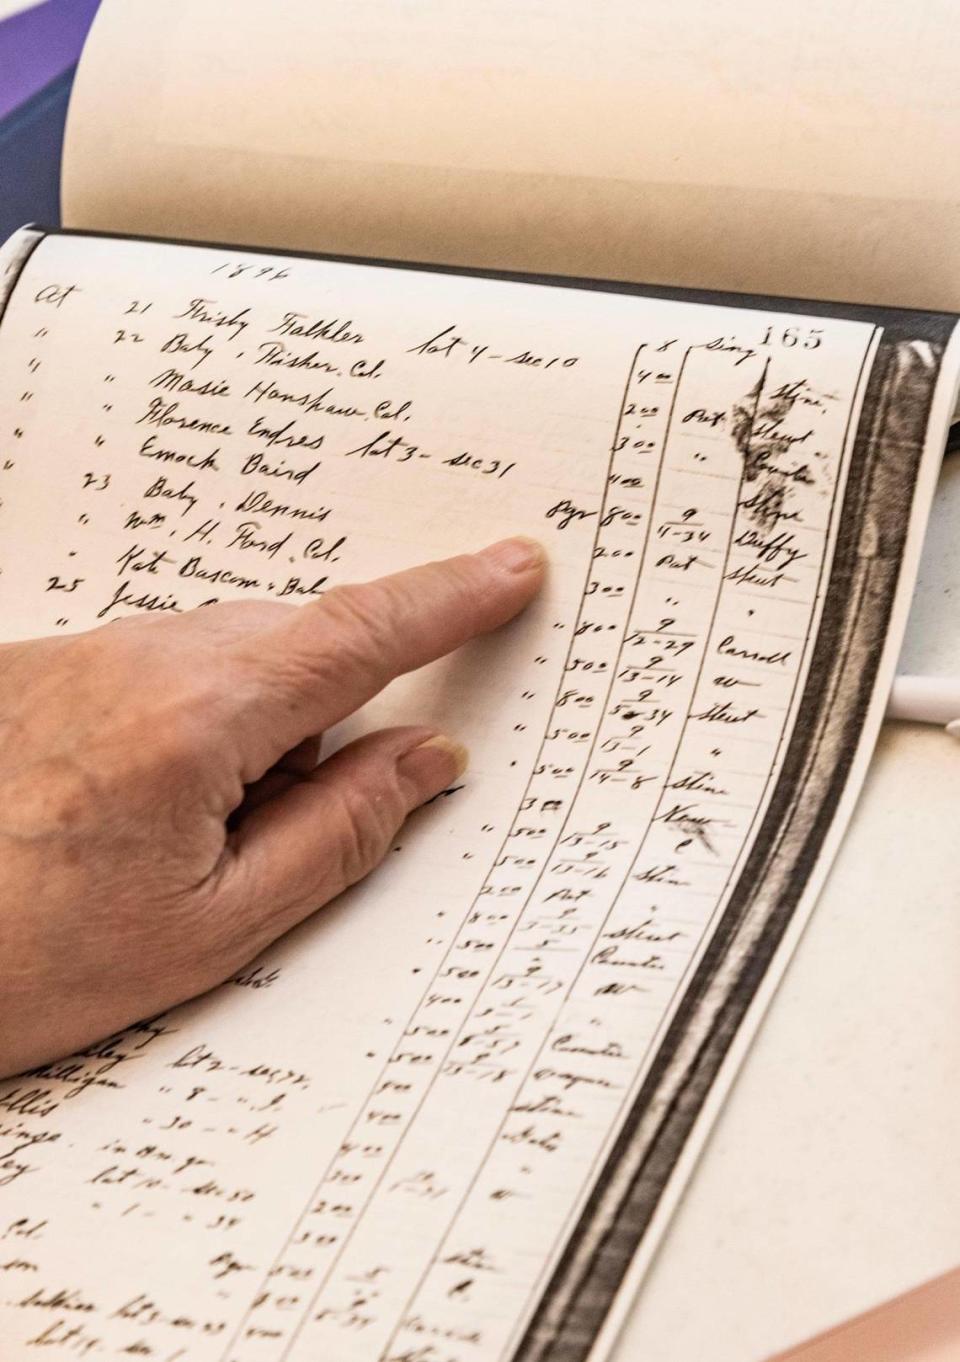 Volunteers have spent five years so far digitizing the burial records of some of the 55,000 people buried at Union Cemetery, taken from documents, such as this handwritten sexton’s record of people buried in 1896.